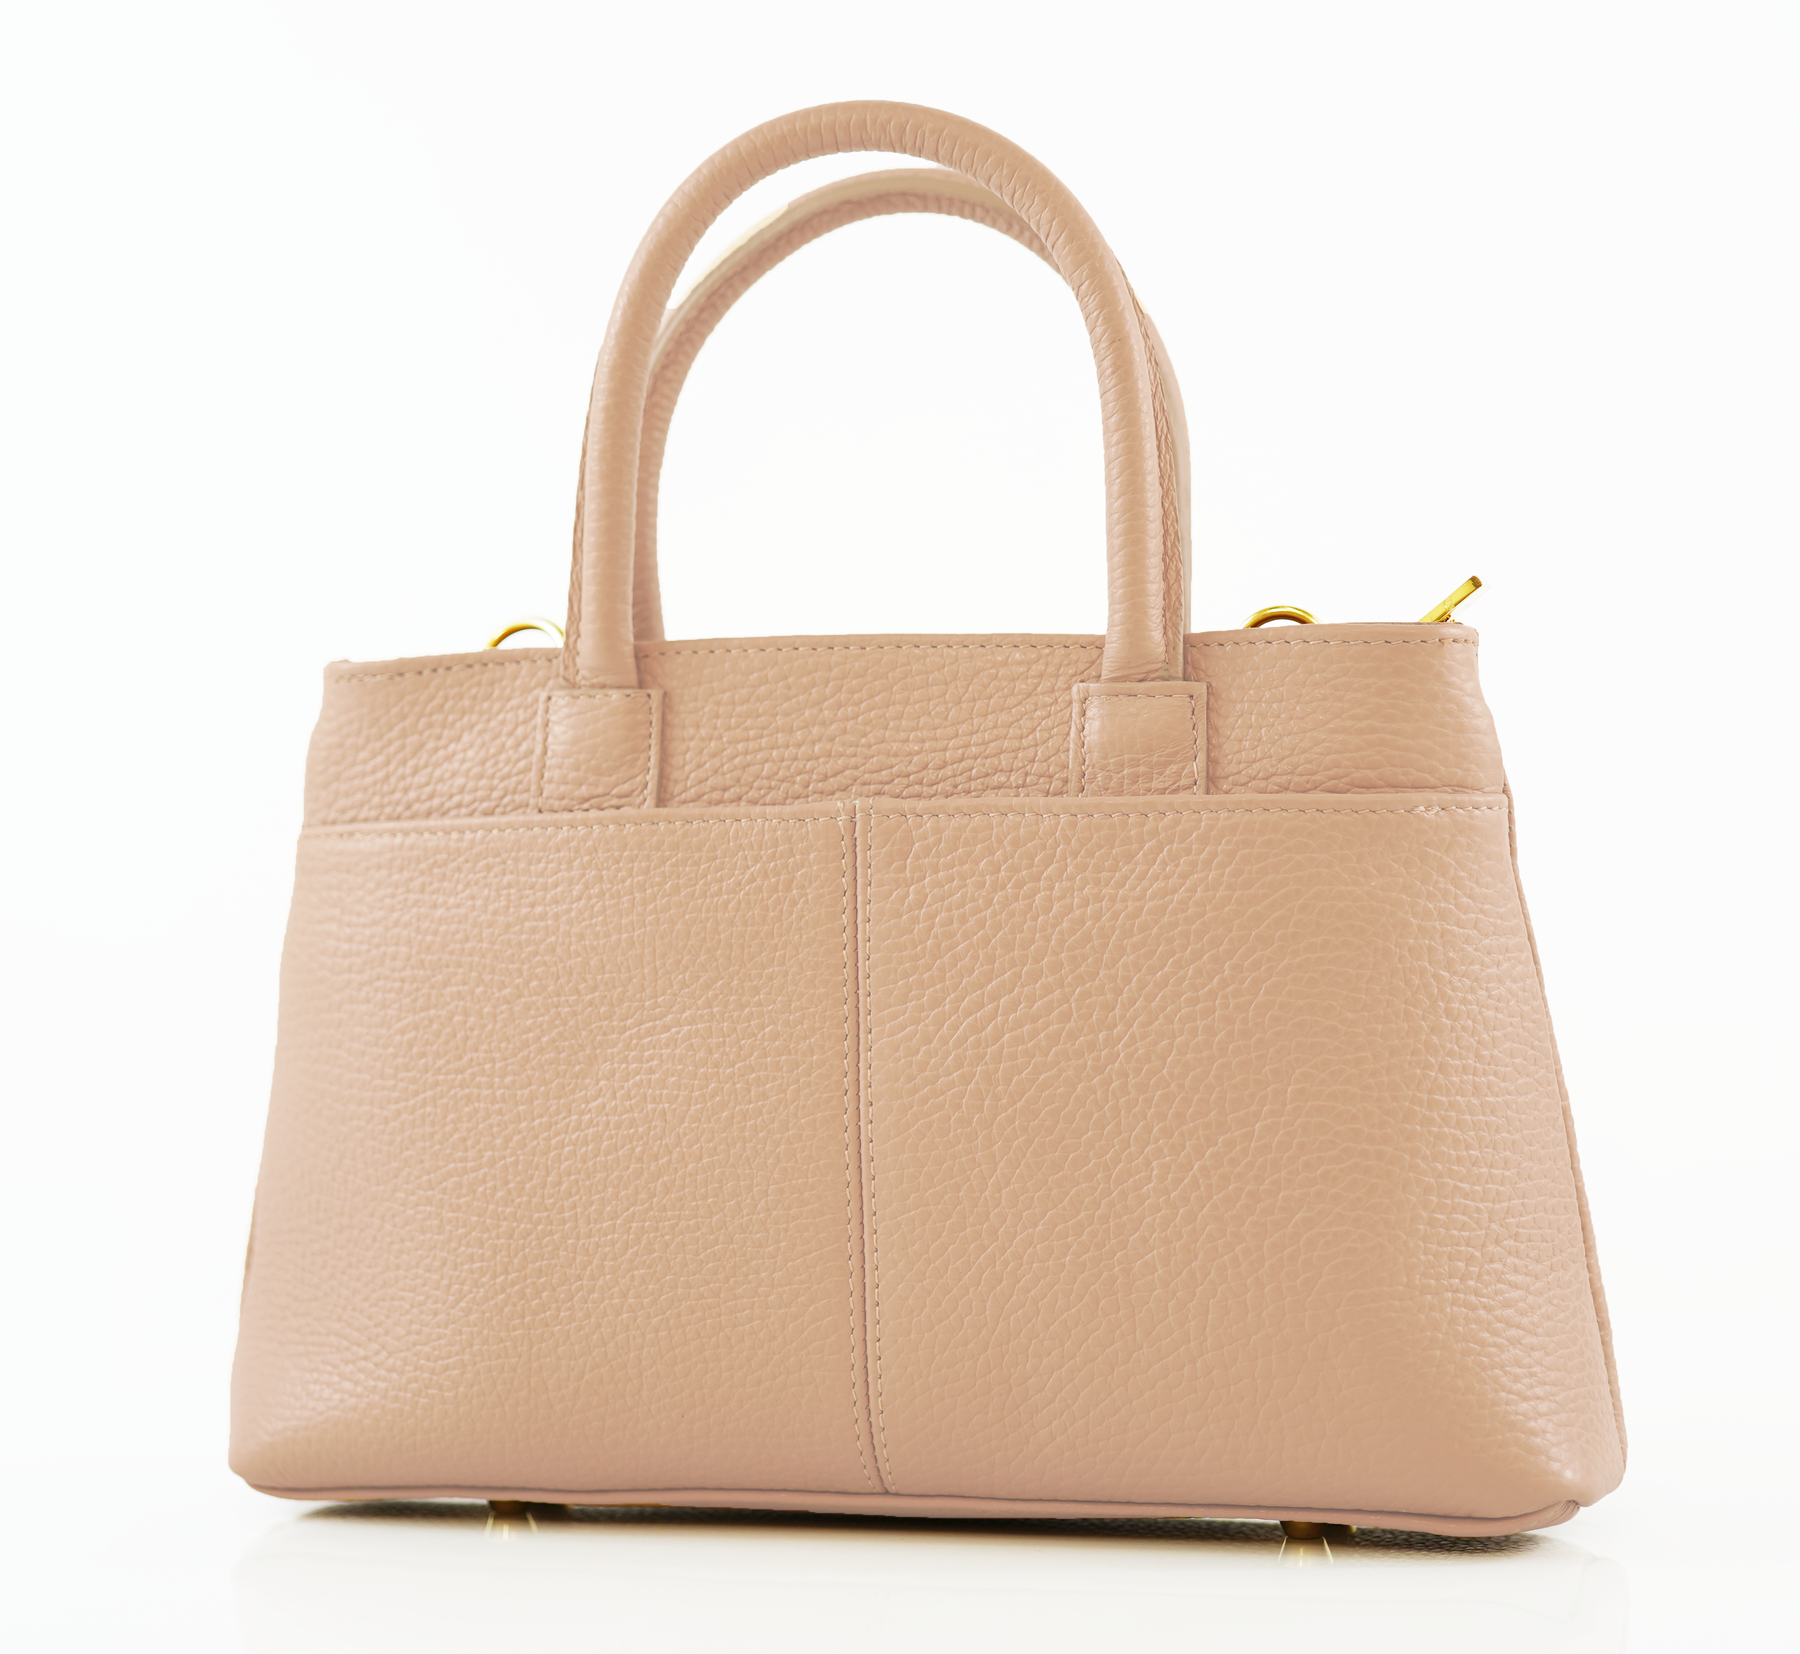 The Becky Leather Tote Bag